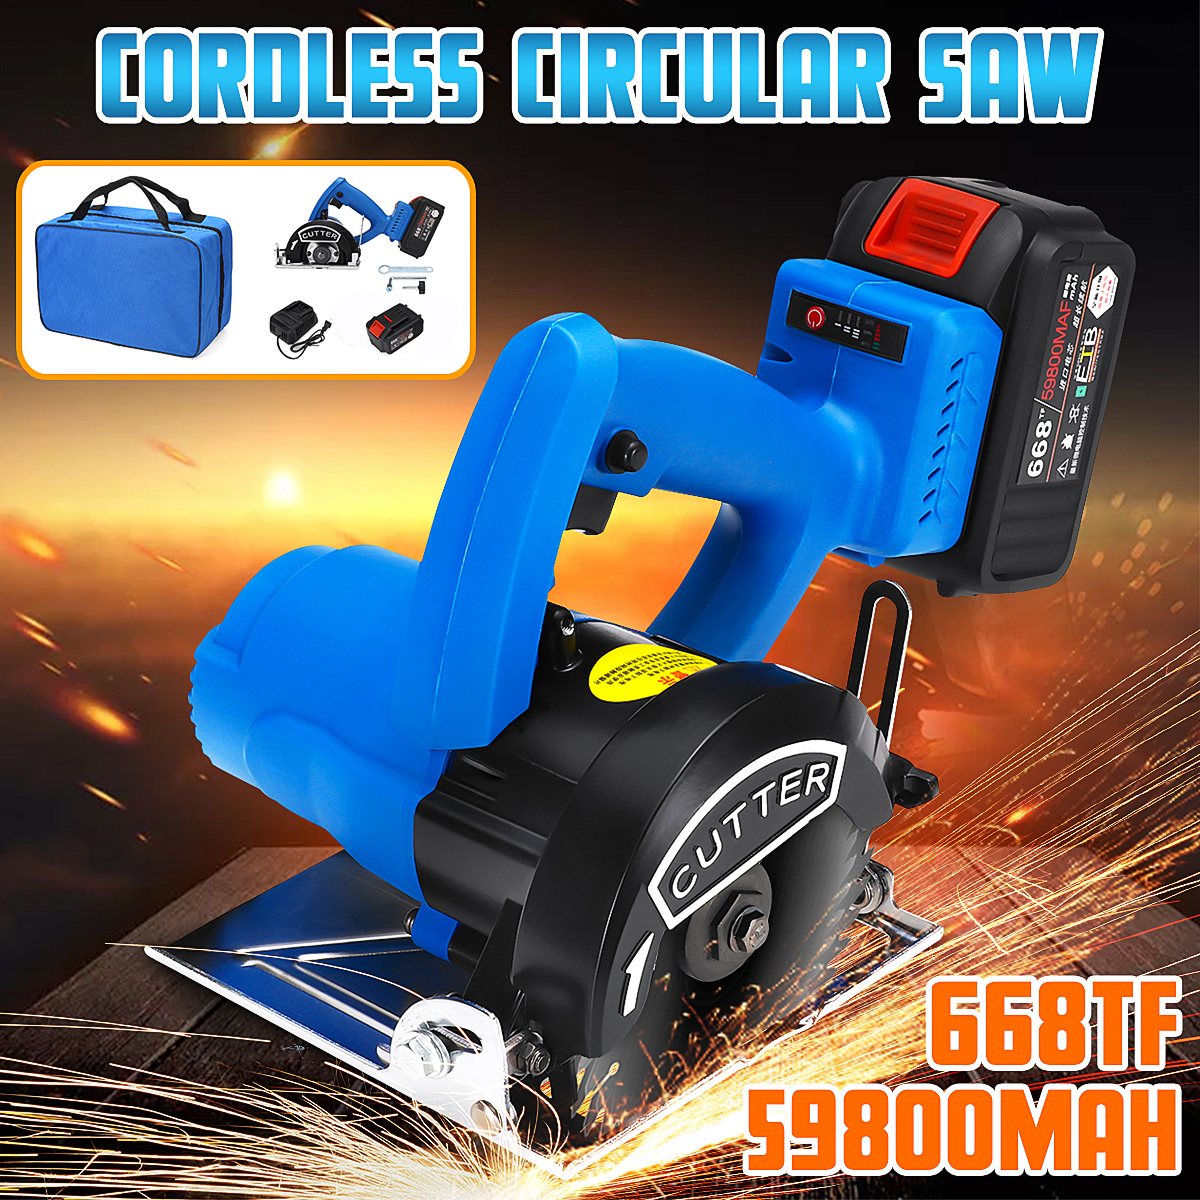 668TF 59800mAh 1500W Cordless Circular Saw Electric Brushless Saw Blade Saw Woodworking Tools Rechargeable Metal Tile Cutting Machine Saws 12